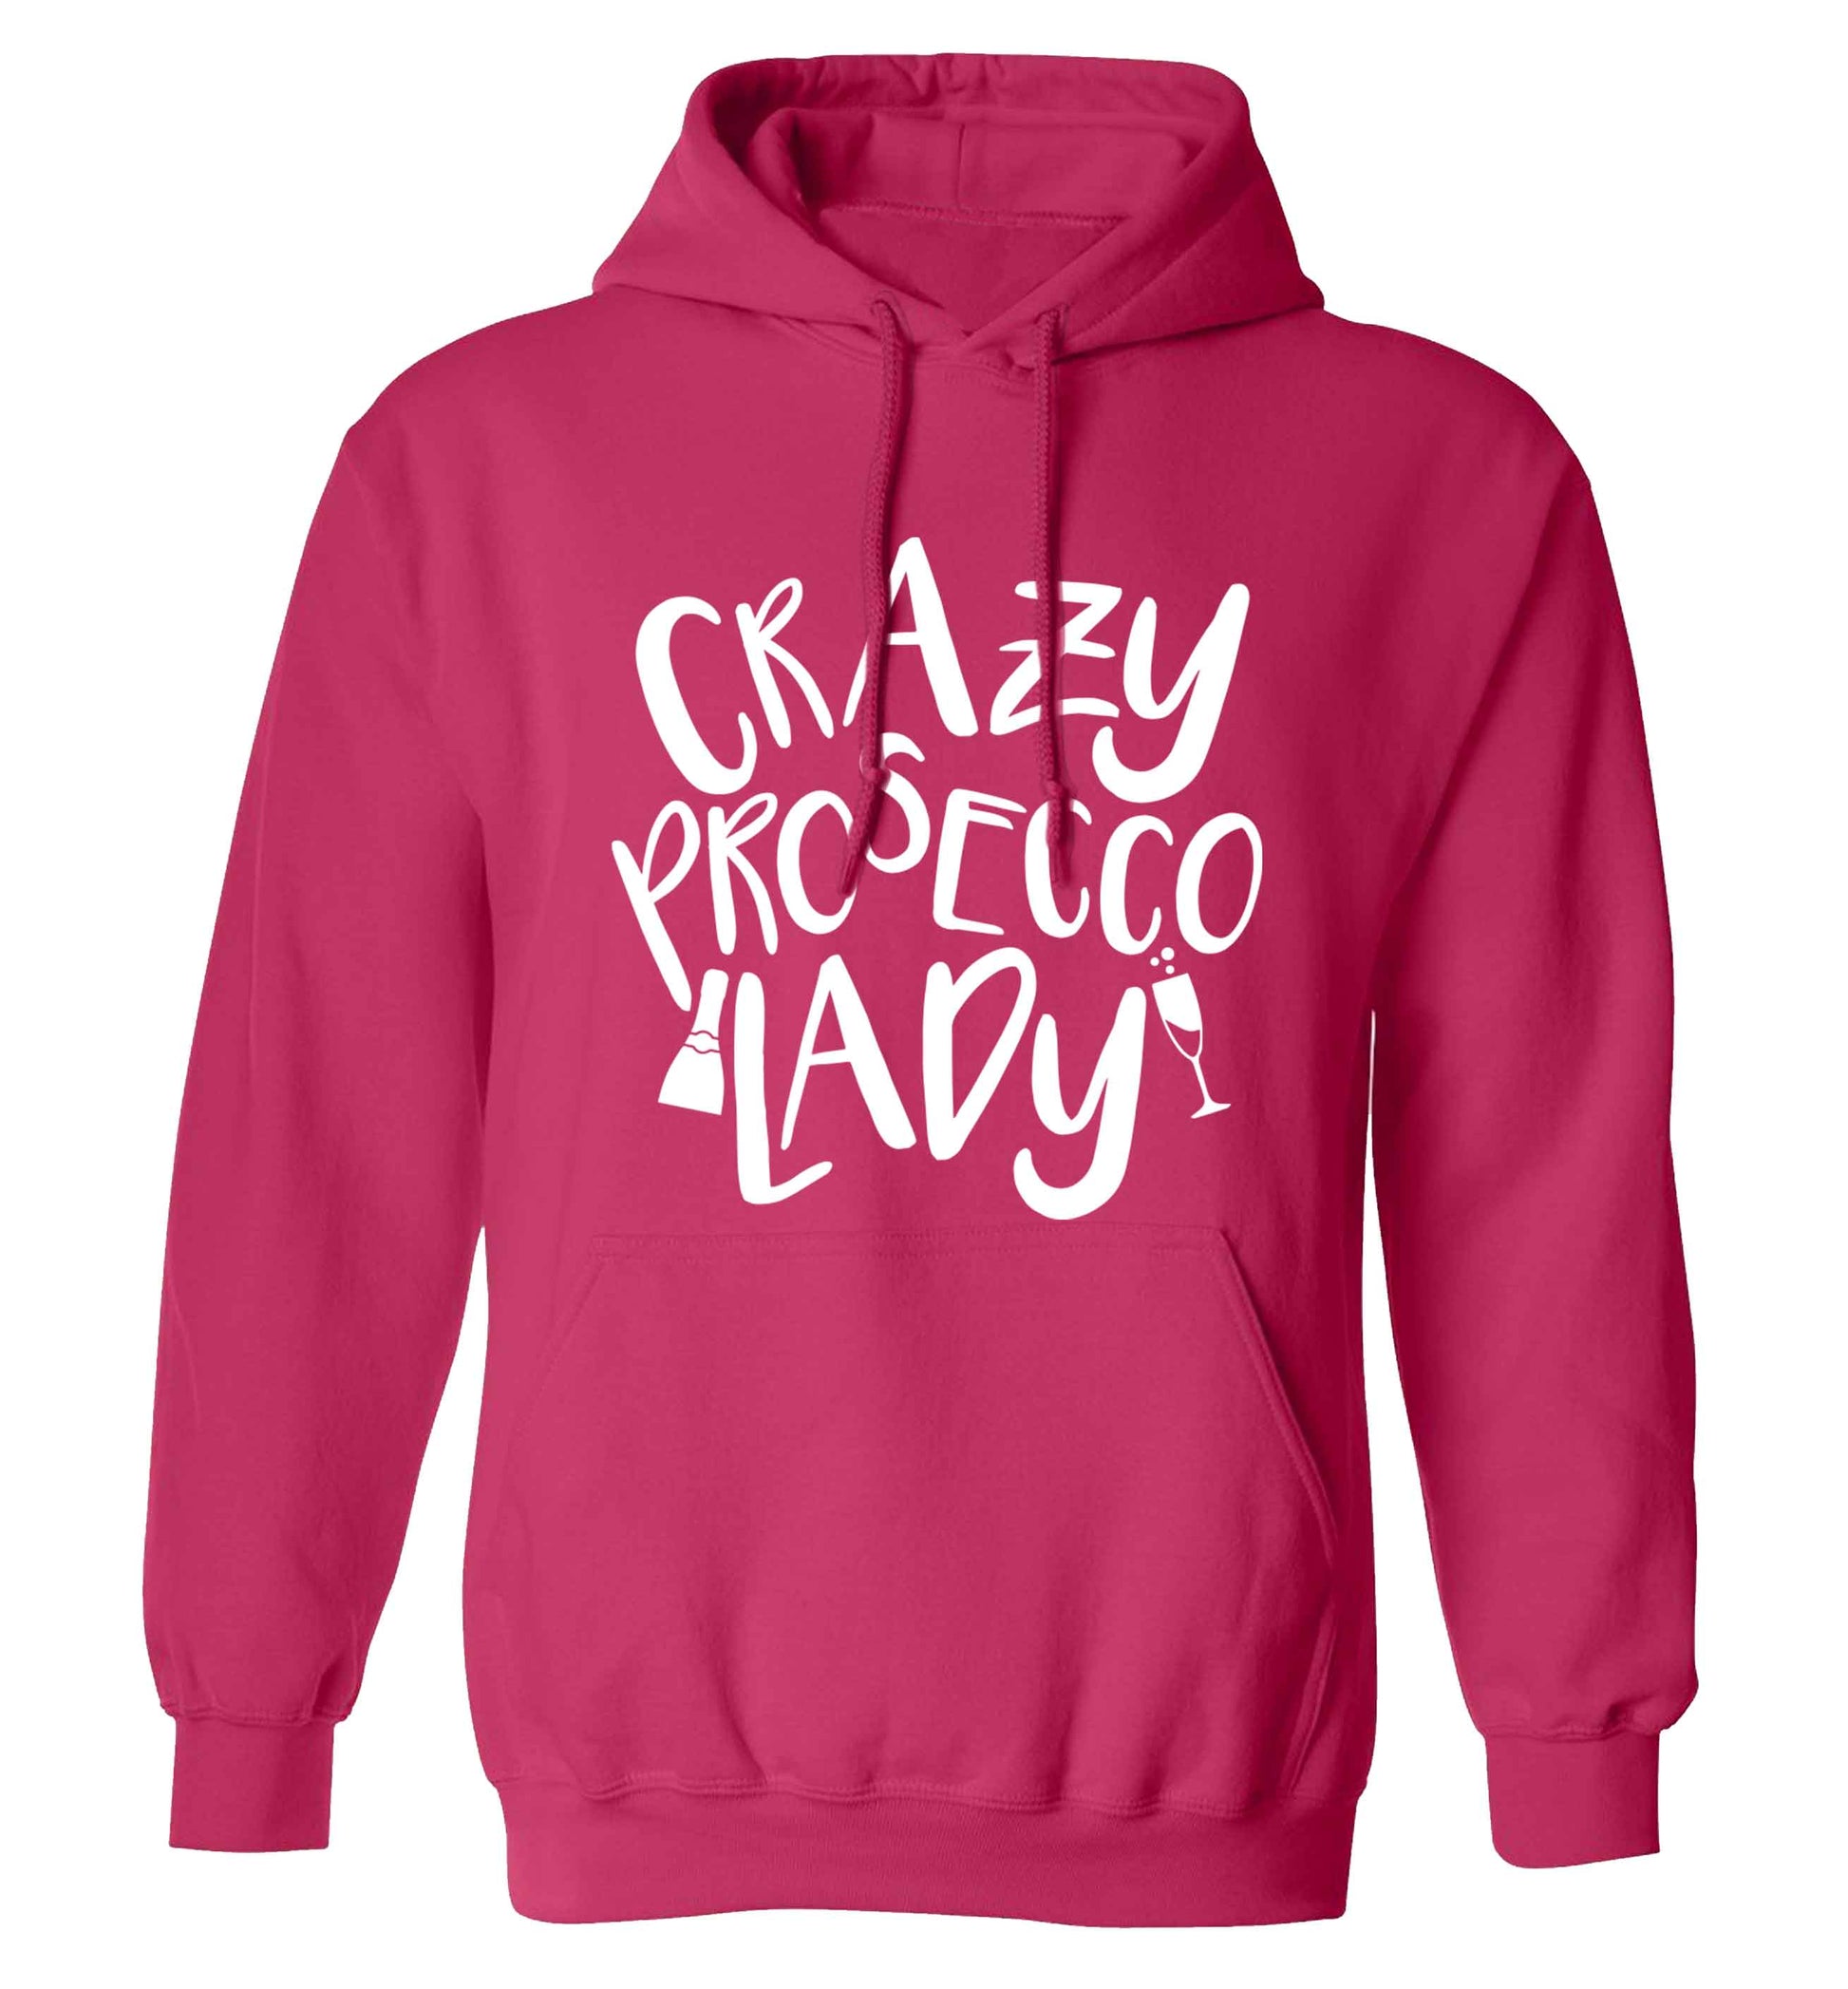 Crazy prosecco lady adults unisex pink hoodie 2XL